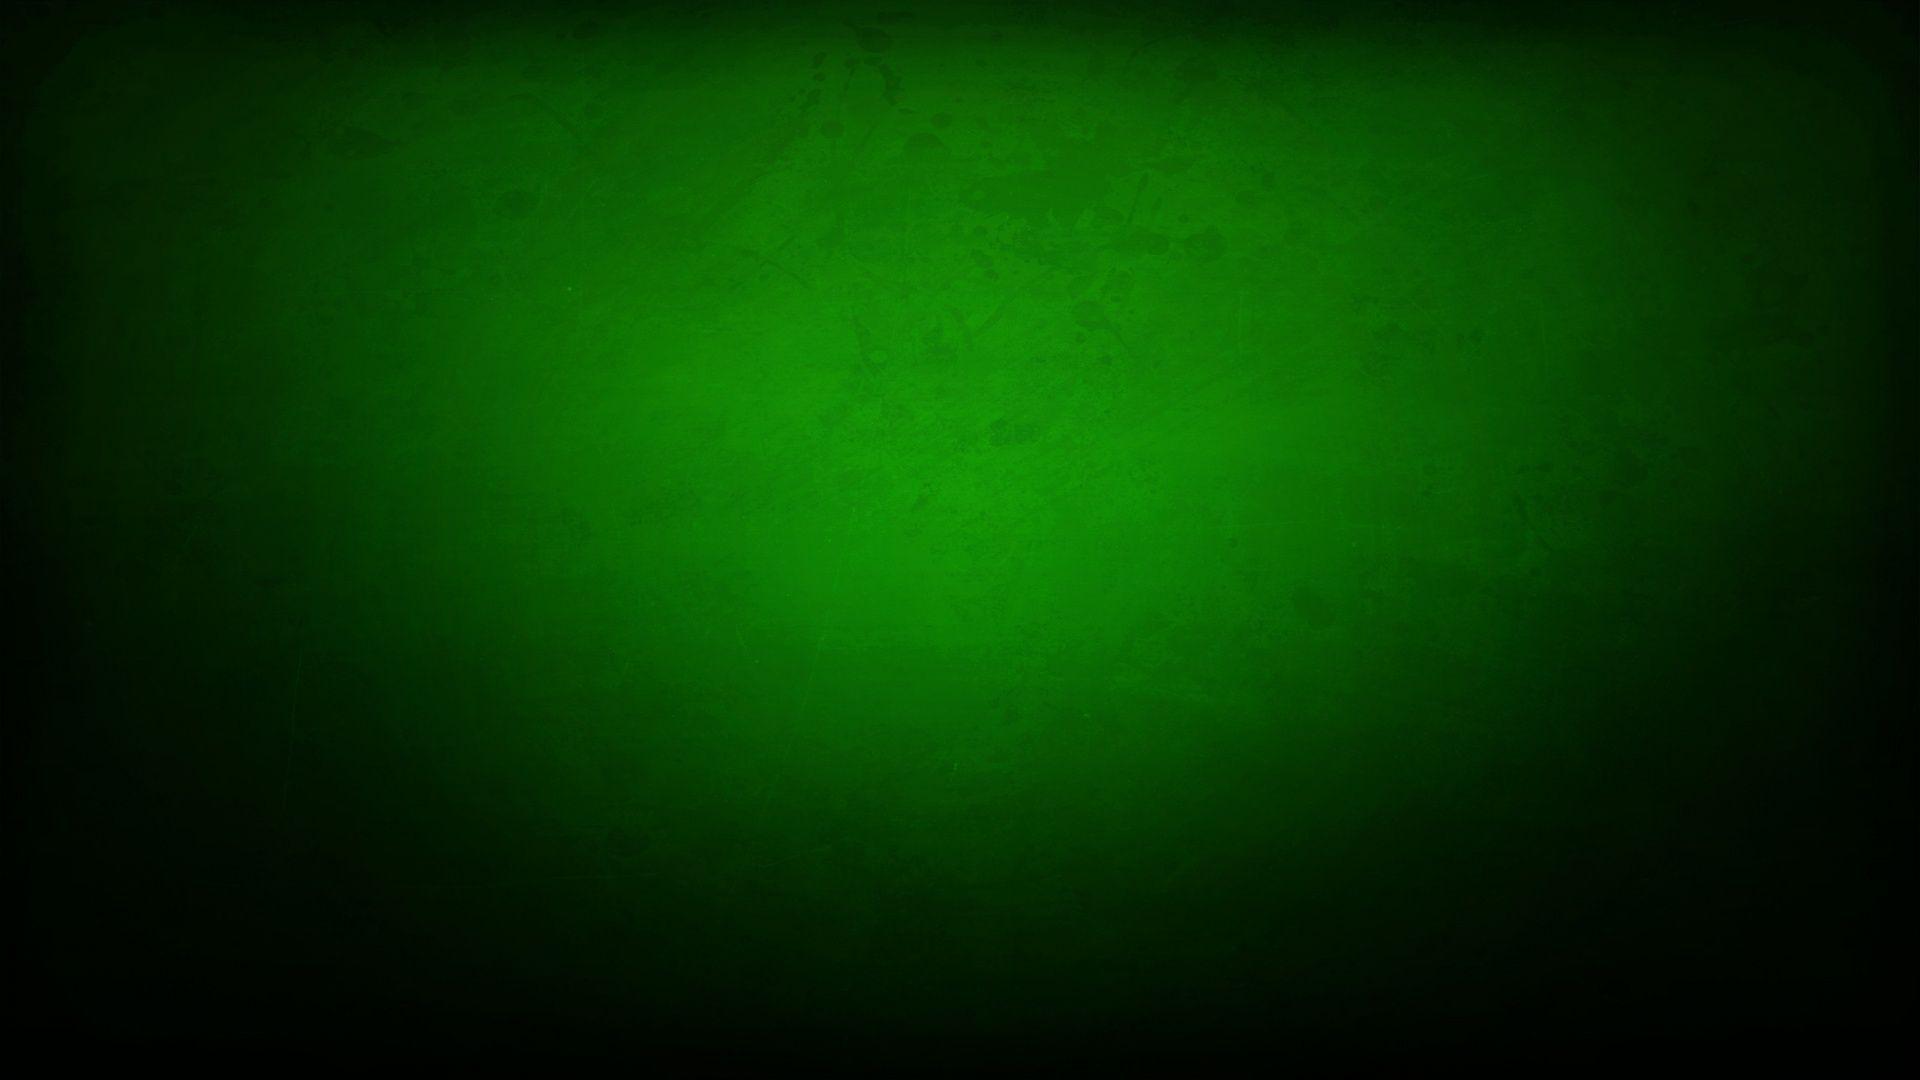 Wallpapers For > Cool Green And Black Backgrounds